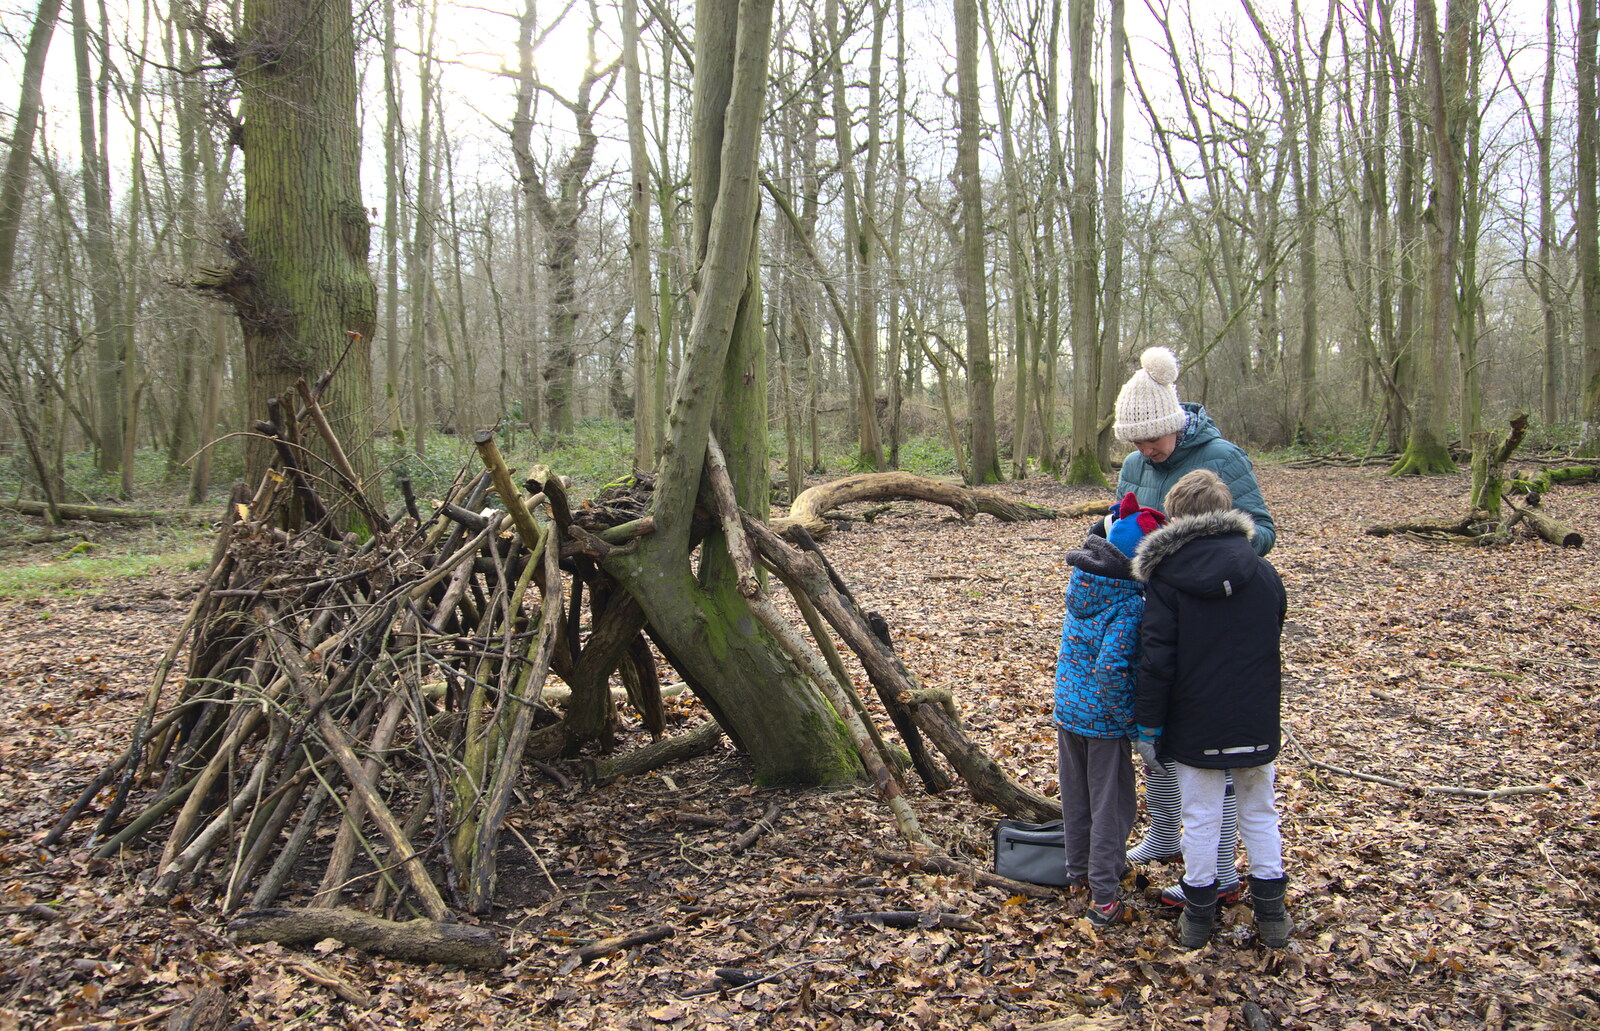 We build a smaller den nearby from A Return to Thornham Walks, Suffolk - 4th February 2018